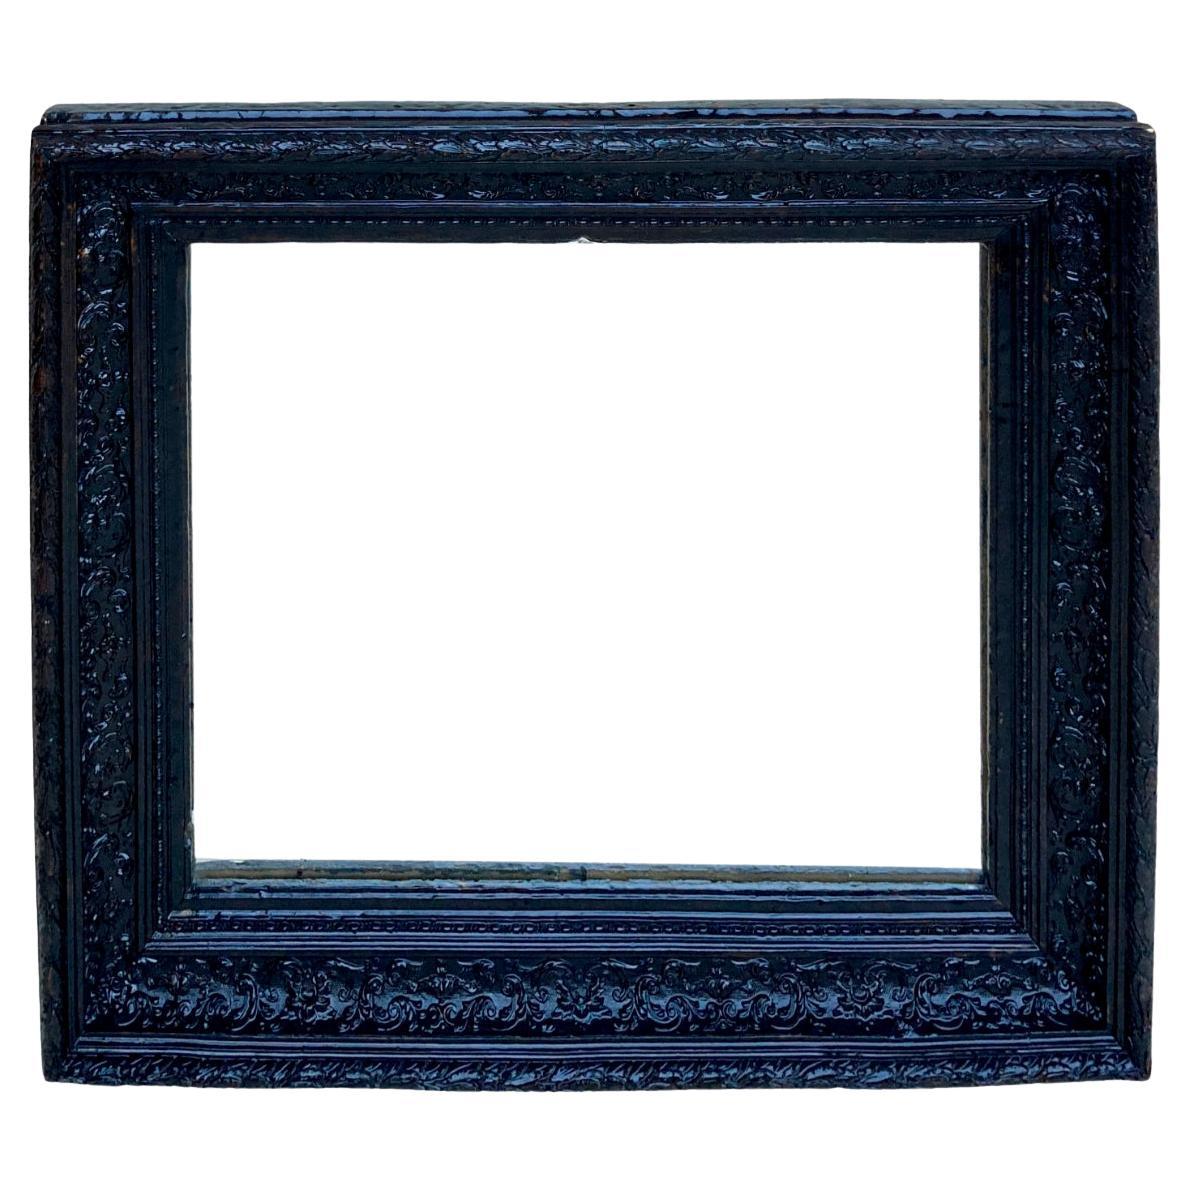 Mirror from the 1920s, made up of a large black walnut wood frame that elegantly supports the mirror. Original mirror.
Frameless mirror measurements:
height: 53.5cm
width: 65cm